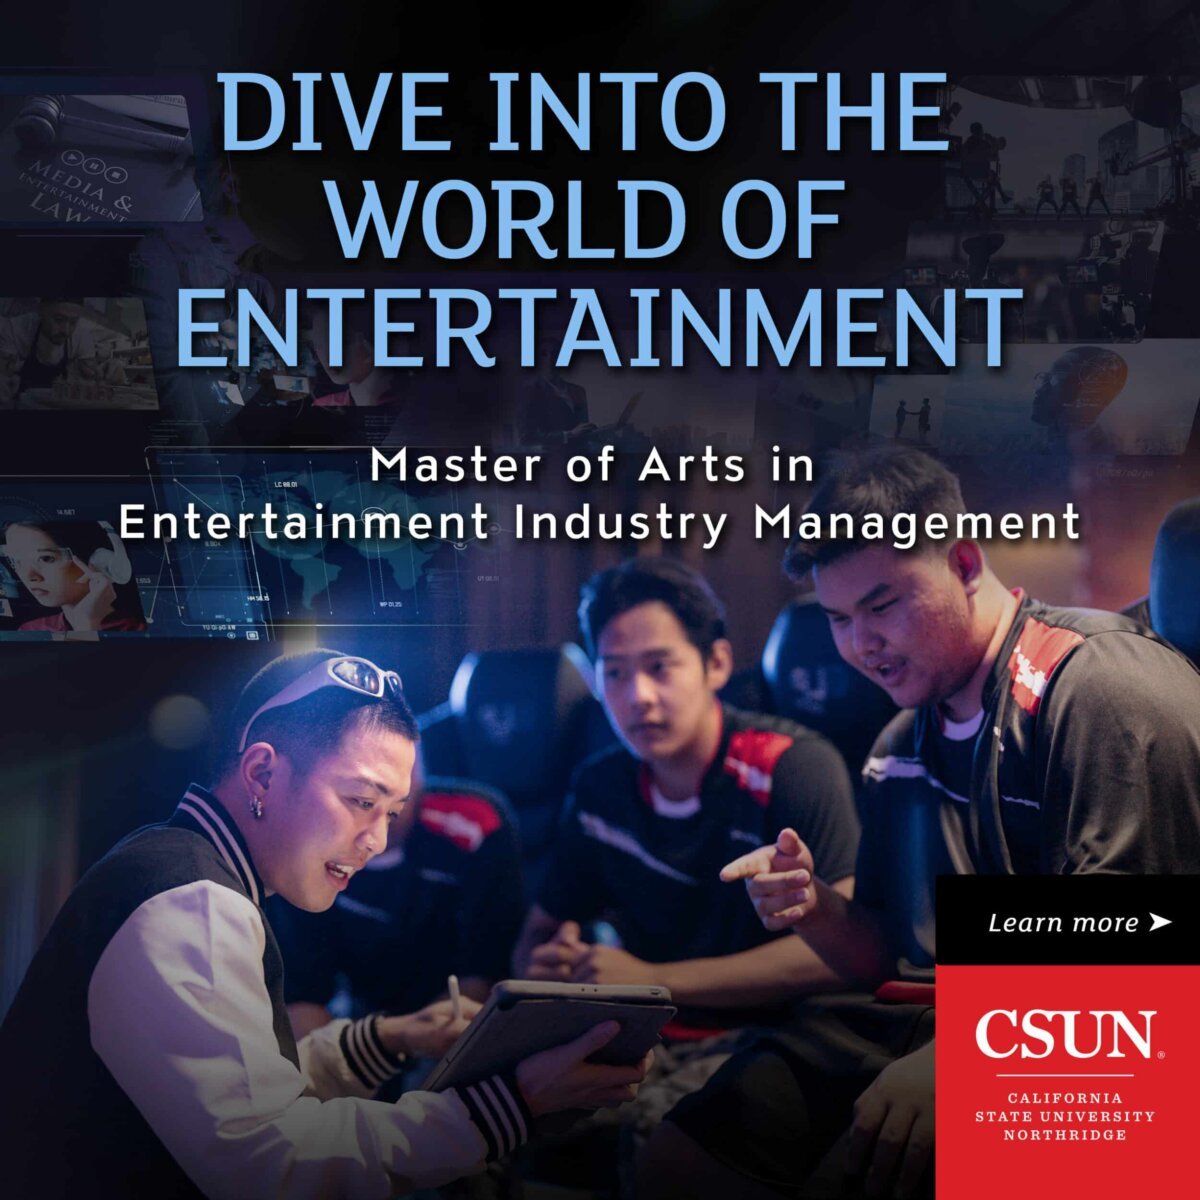 Dive Into the World of Entertainment - Master of Arts in Entertainment Industry Management